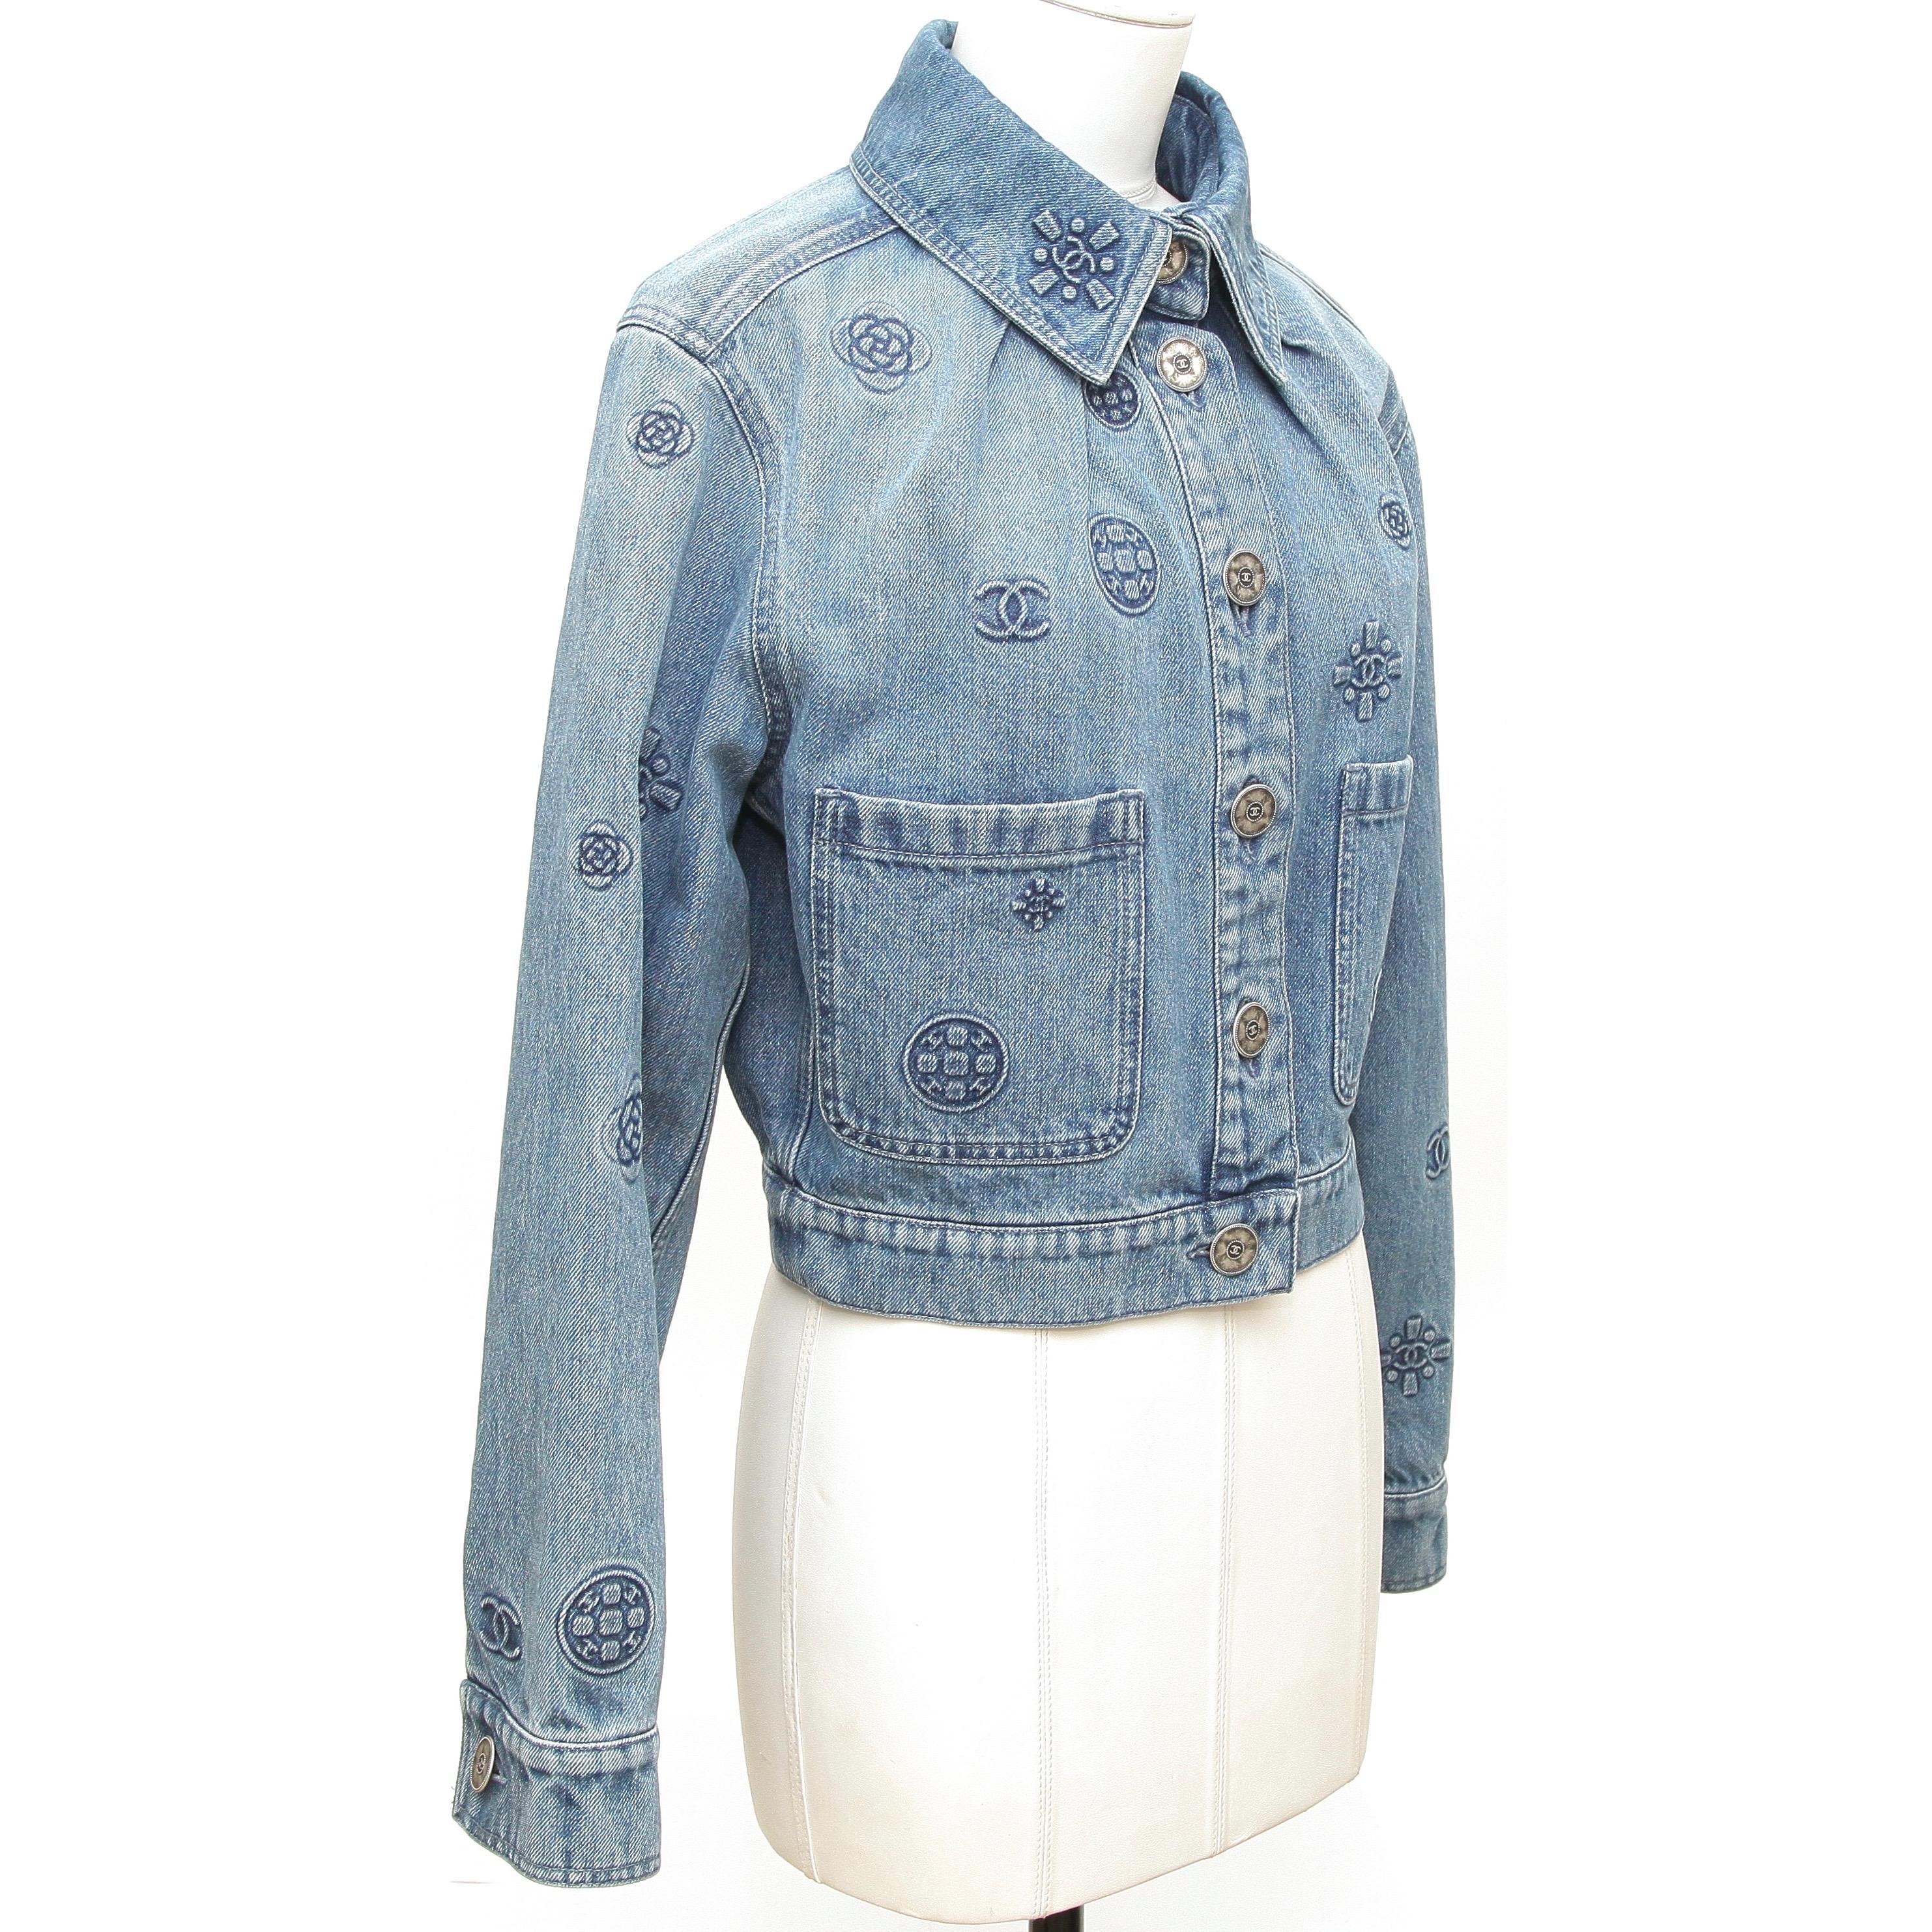 GUARANTEED AUTHENTIC CHANEL SPRING 2021 BLUE DENIM EMBOSSED LOGO JACKET

Design:
- Blue denim jacket.
- Embossed logo throughout.
- Button closure.
- Pointed collar.
- Dual patch pockets.
- Long sleeve.
- Comes with extra fabric swatch.

Fabric: